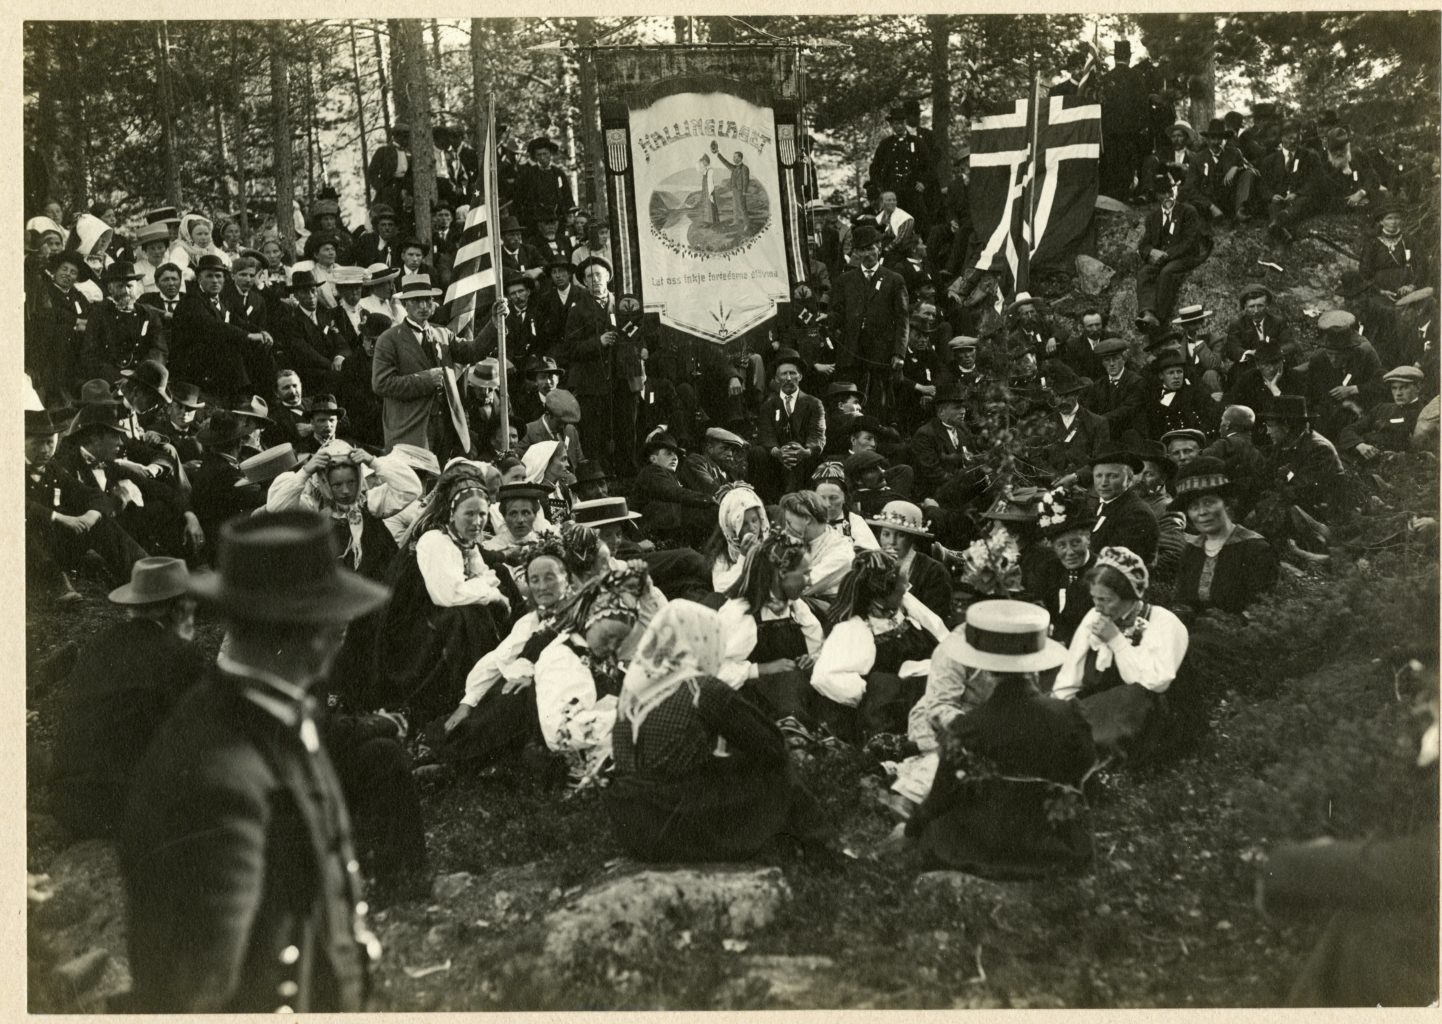 Large group outside in national dress with Norwegian and American flags flying.